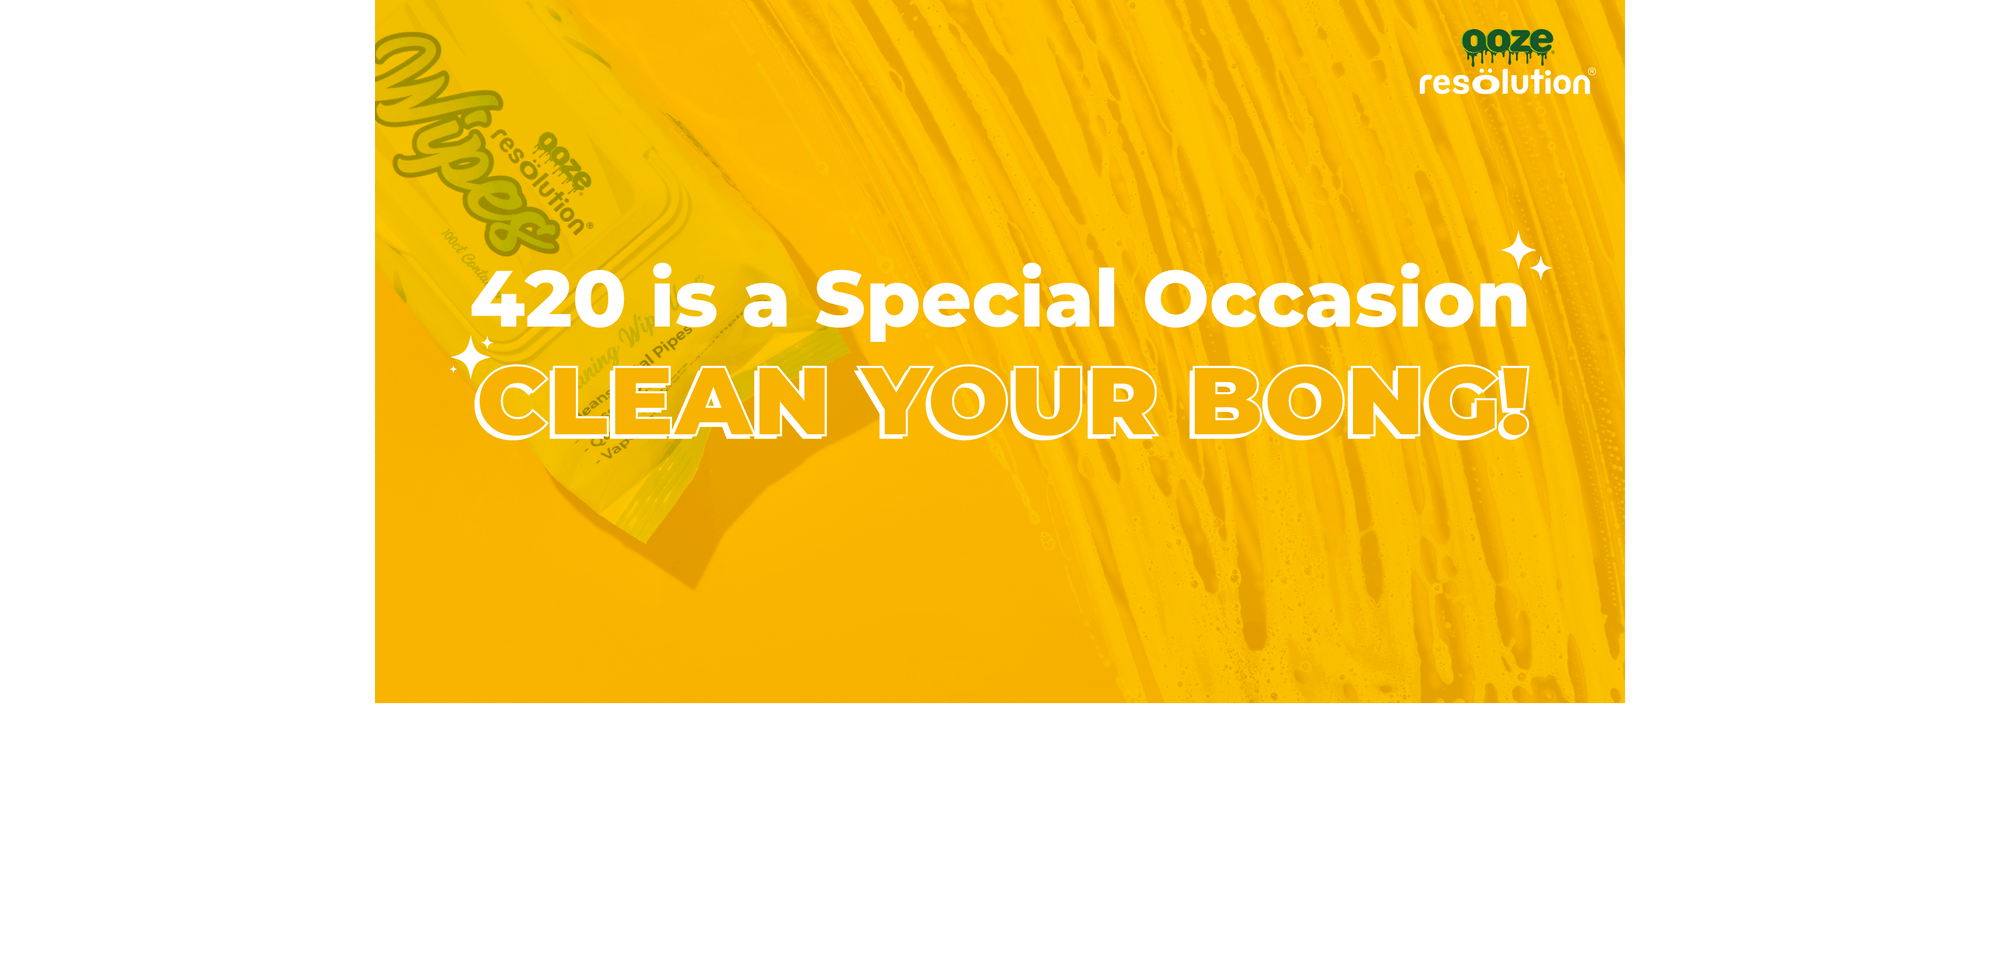 420 is a Special Occasion - Clean Your Bong!